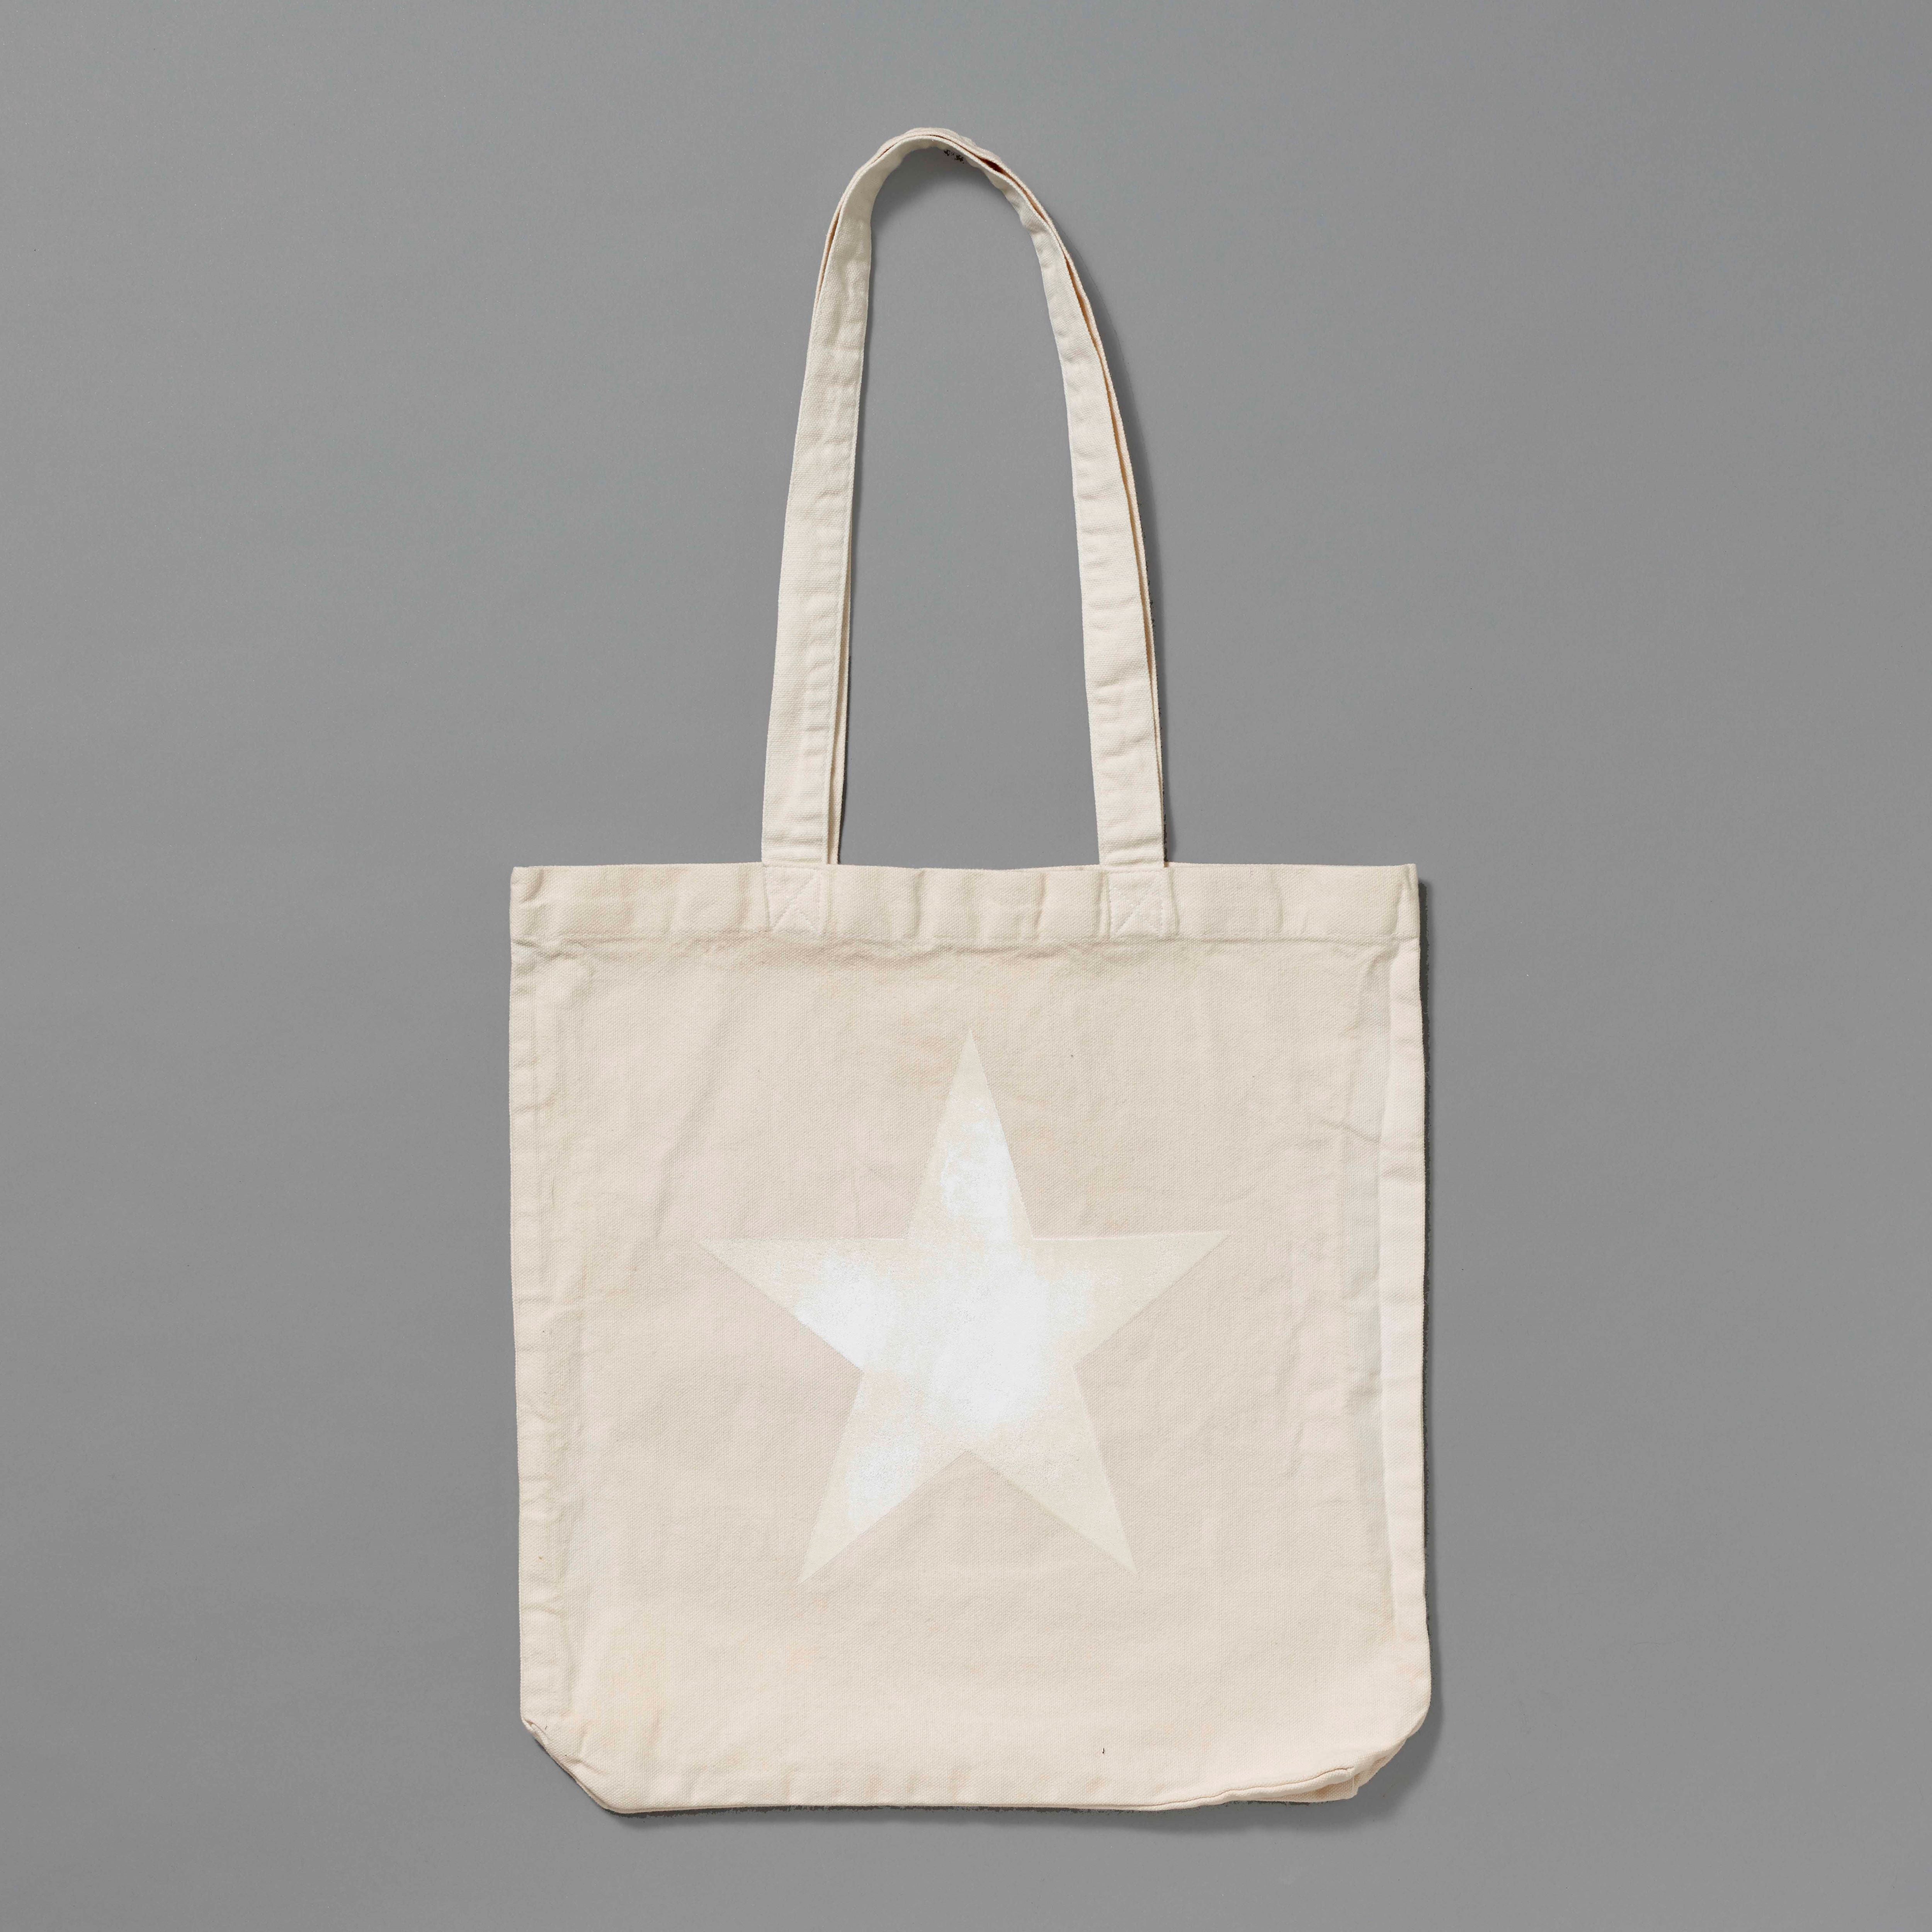 100% Organic Cotton cream tote with white star printed. Measures 15.5" x 13". 11.5" handles